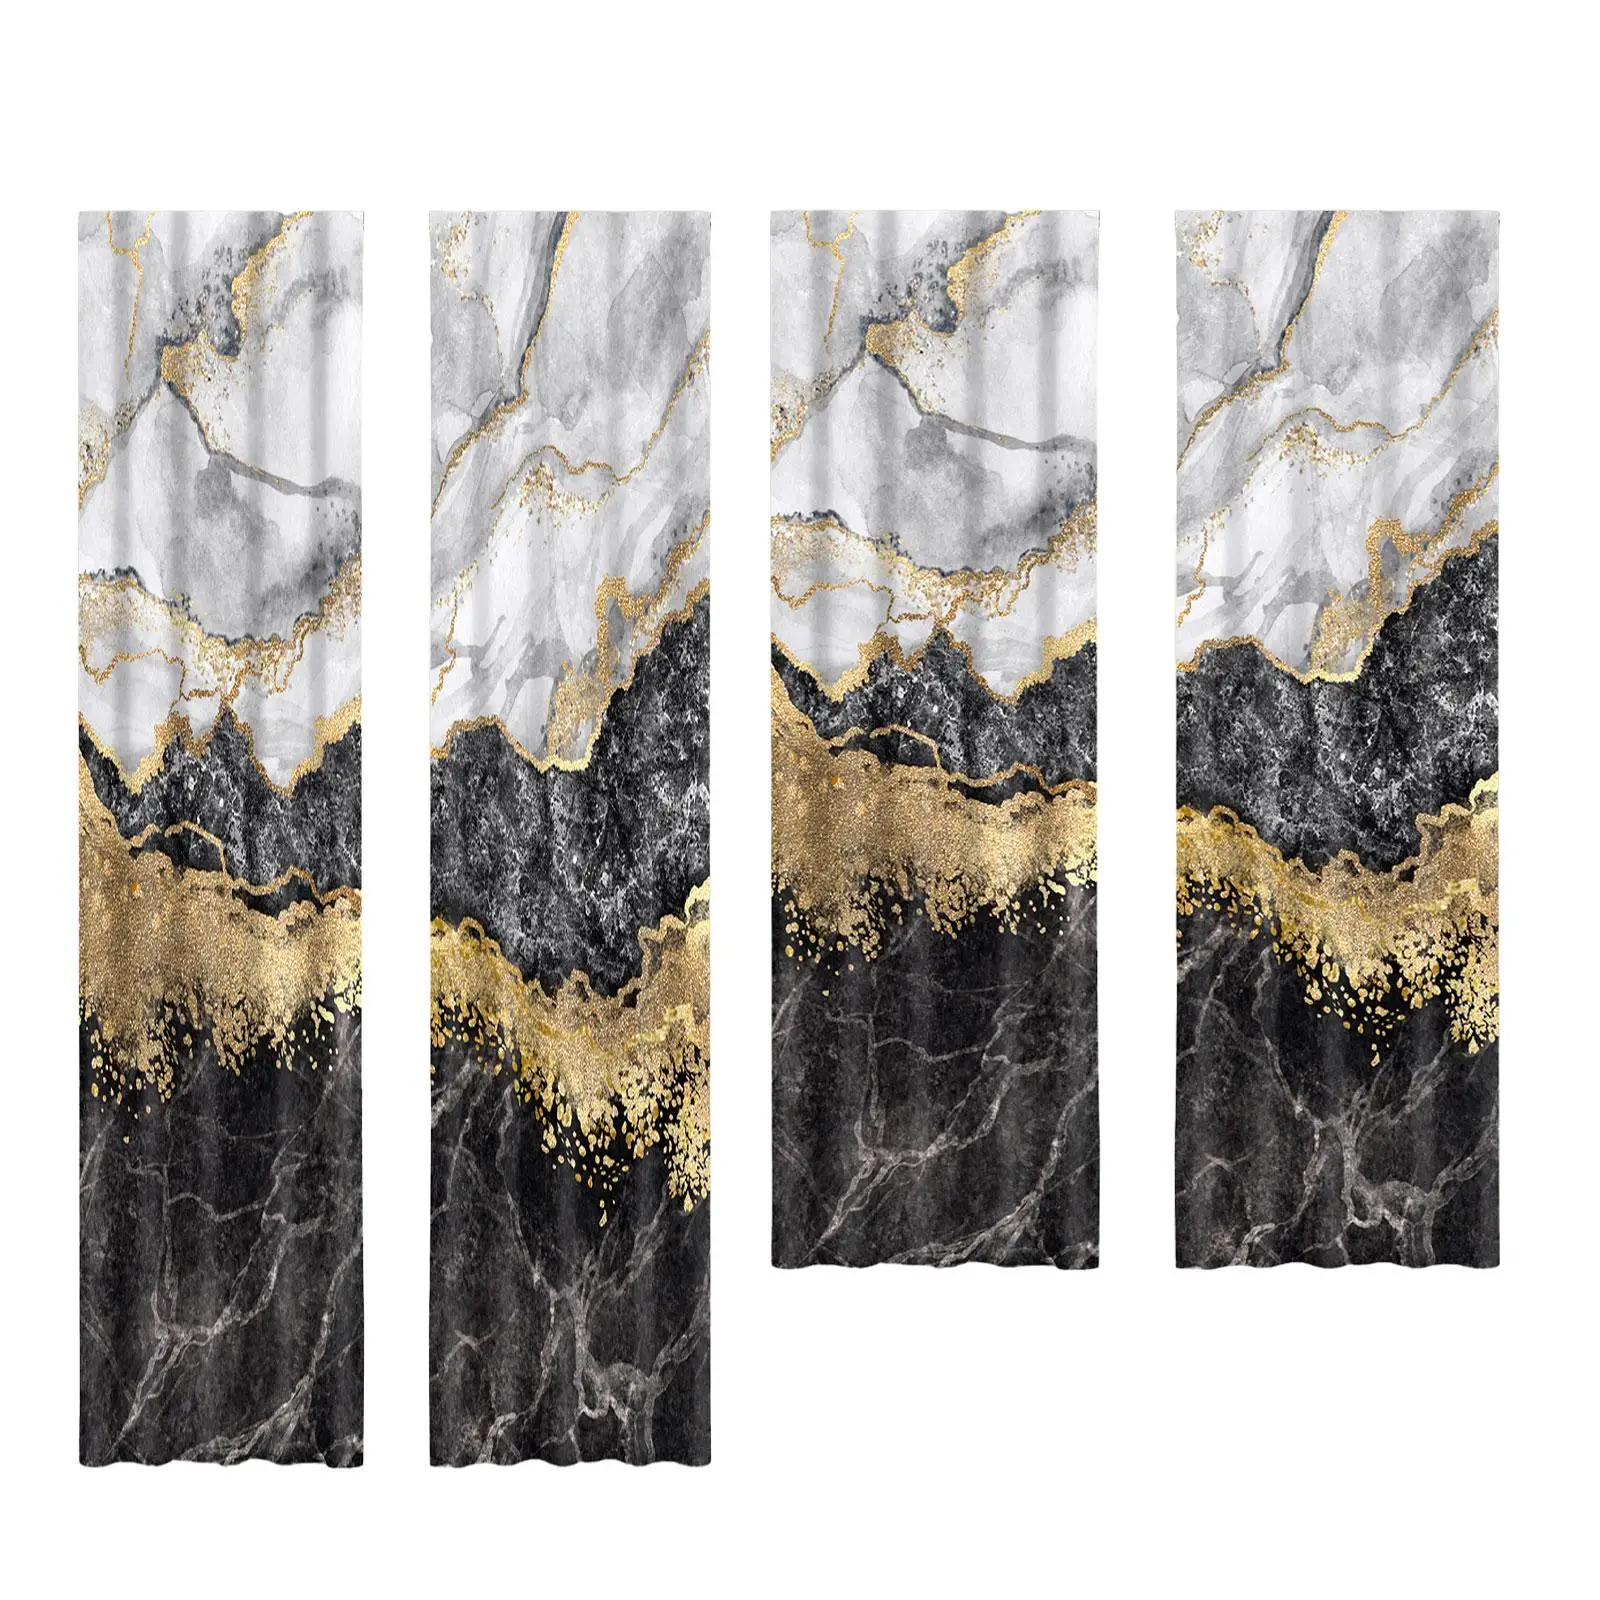 Marble Pattern Digital Print Blackout Curtain Accessories Easily Install and Slide Lightweight Two Panels for Room Decoration